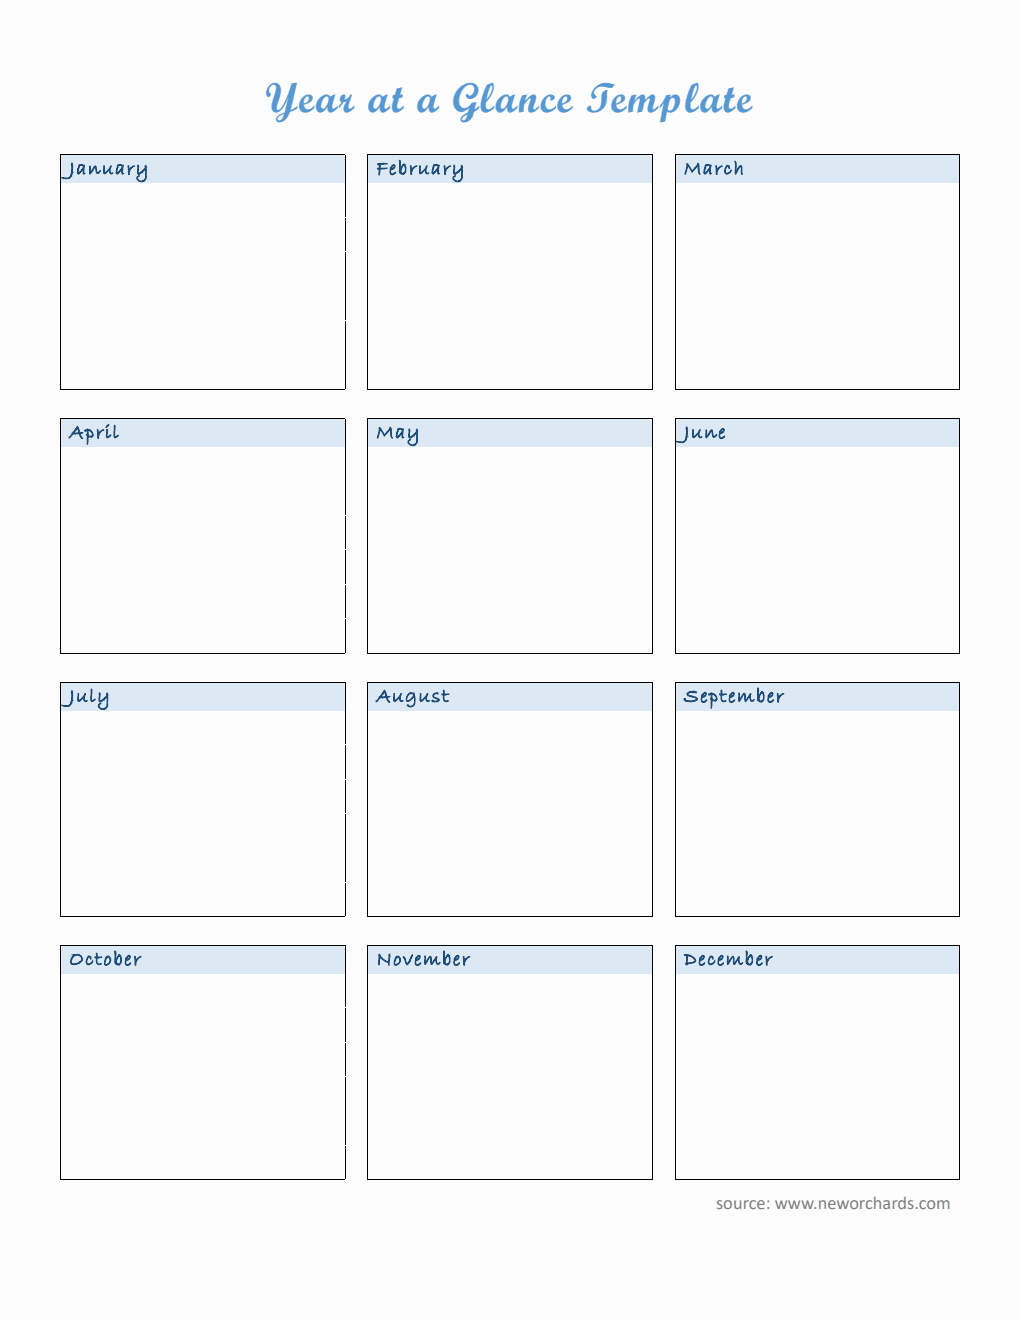 Editable Year at a Glance Template in Word